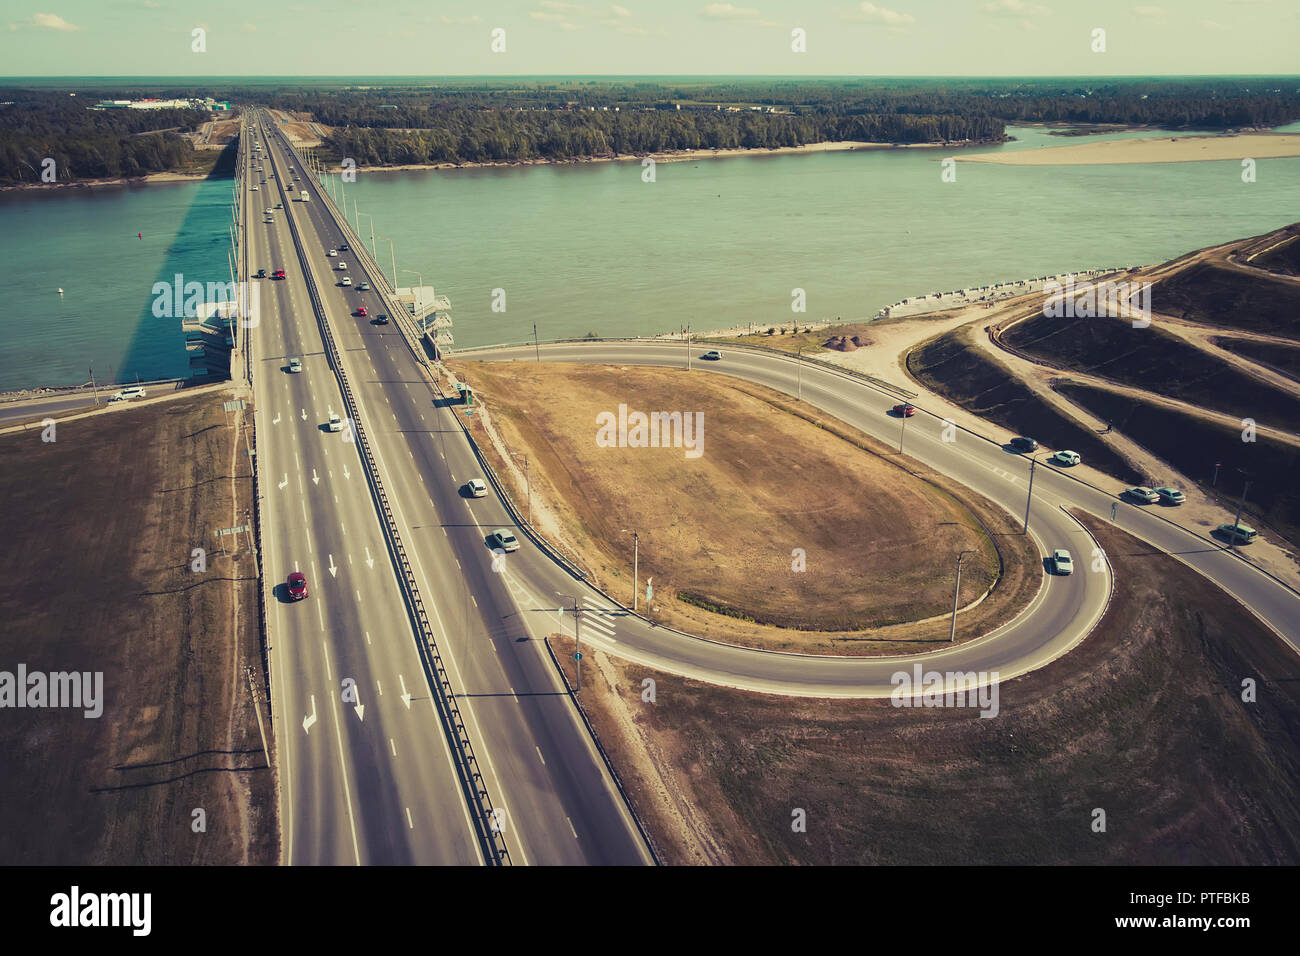 A view to the well-engireed city bridge and road interchange. A straight line of a well-built highway across the river banks and approach to it. City  Stock Photo